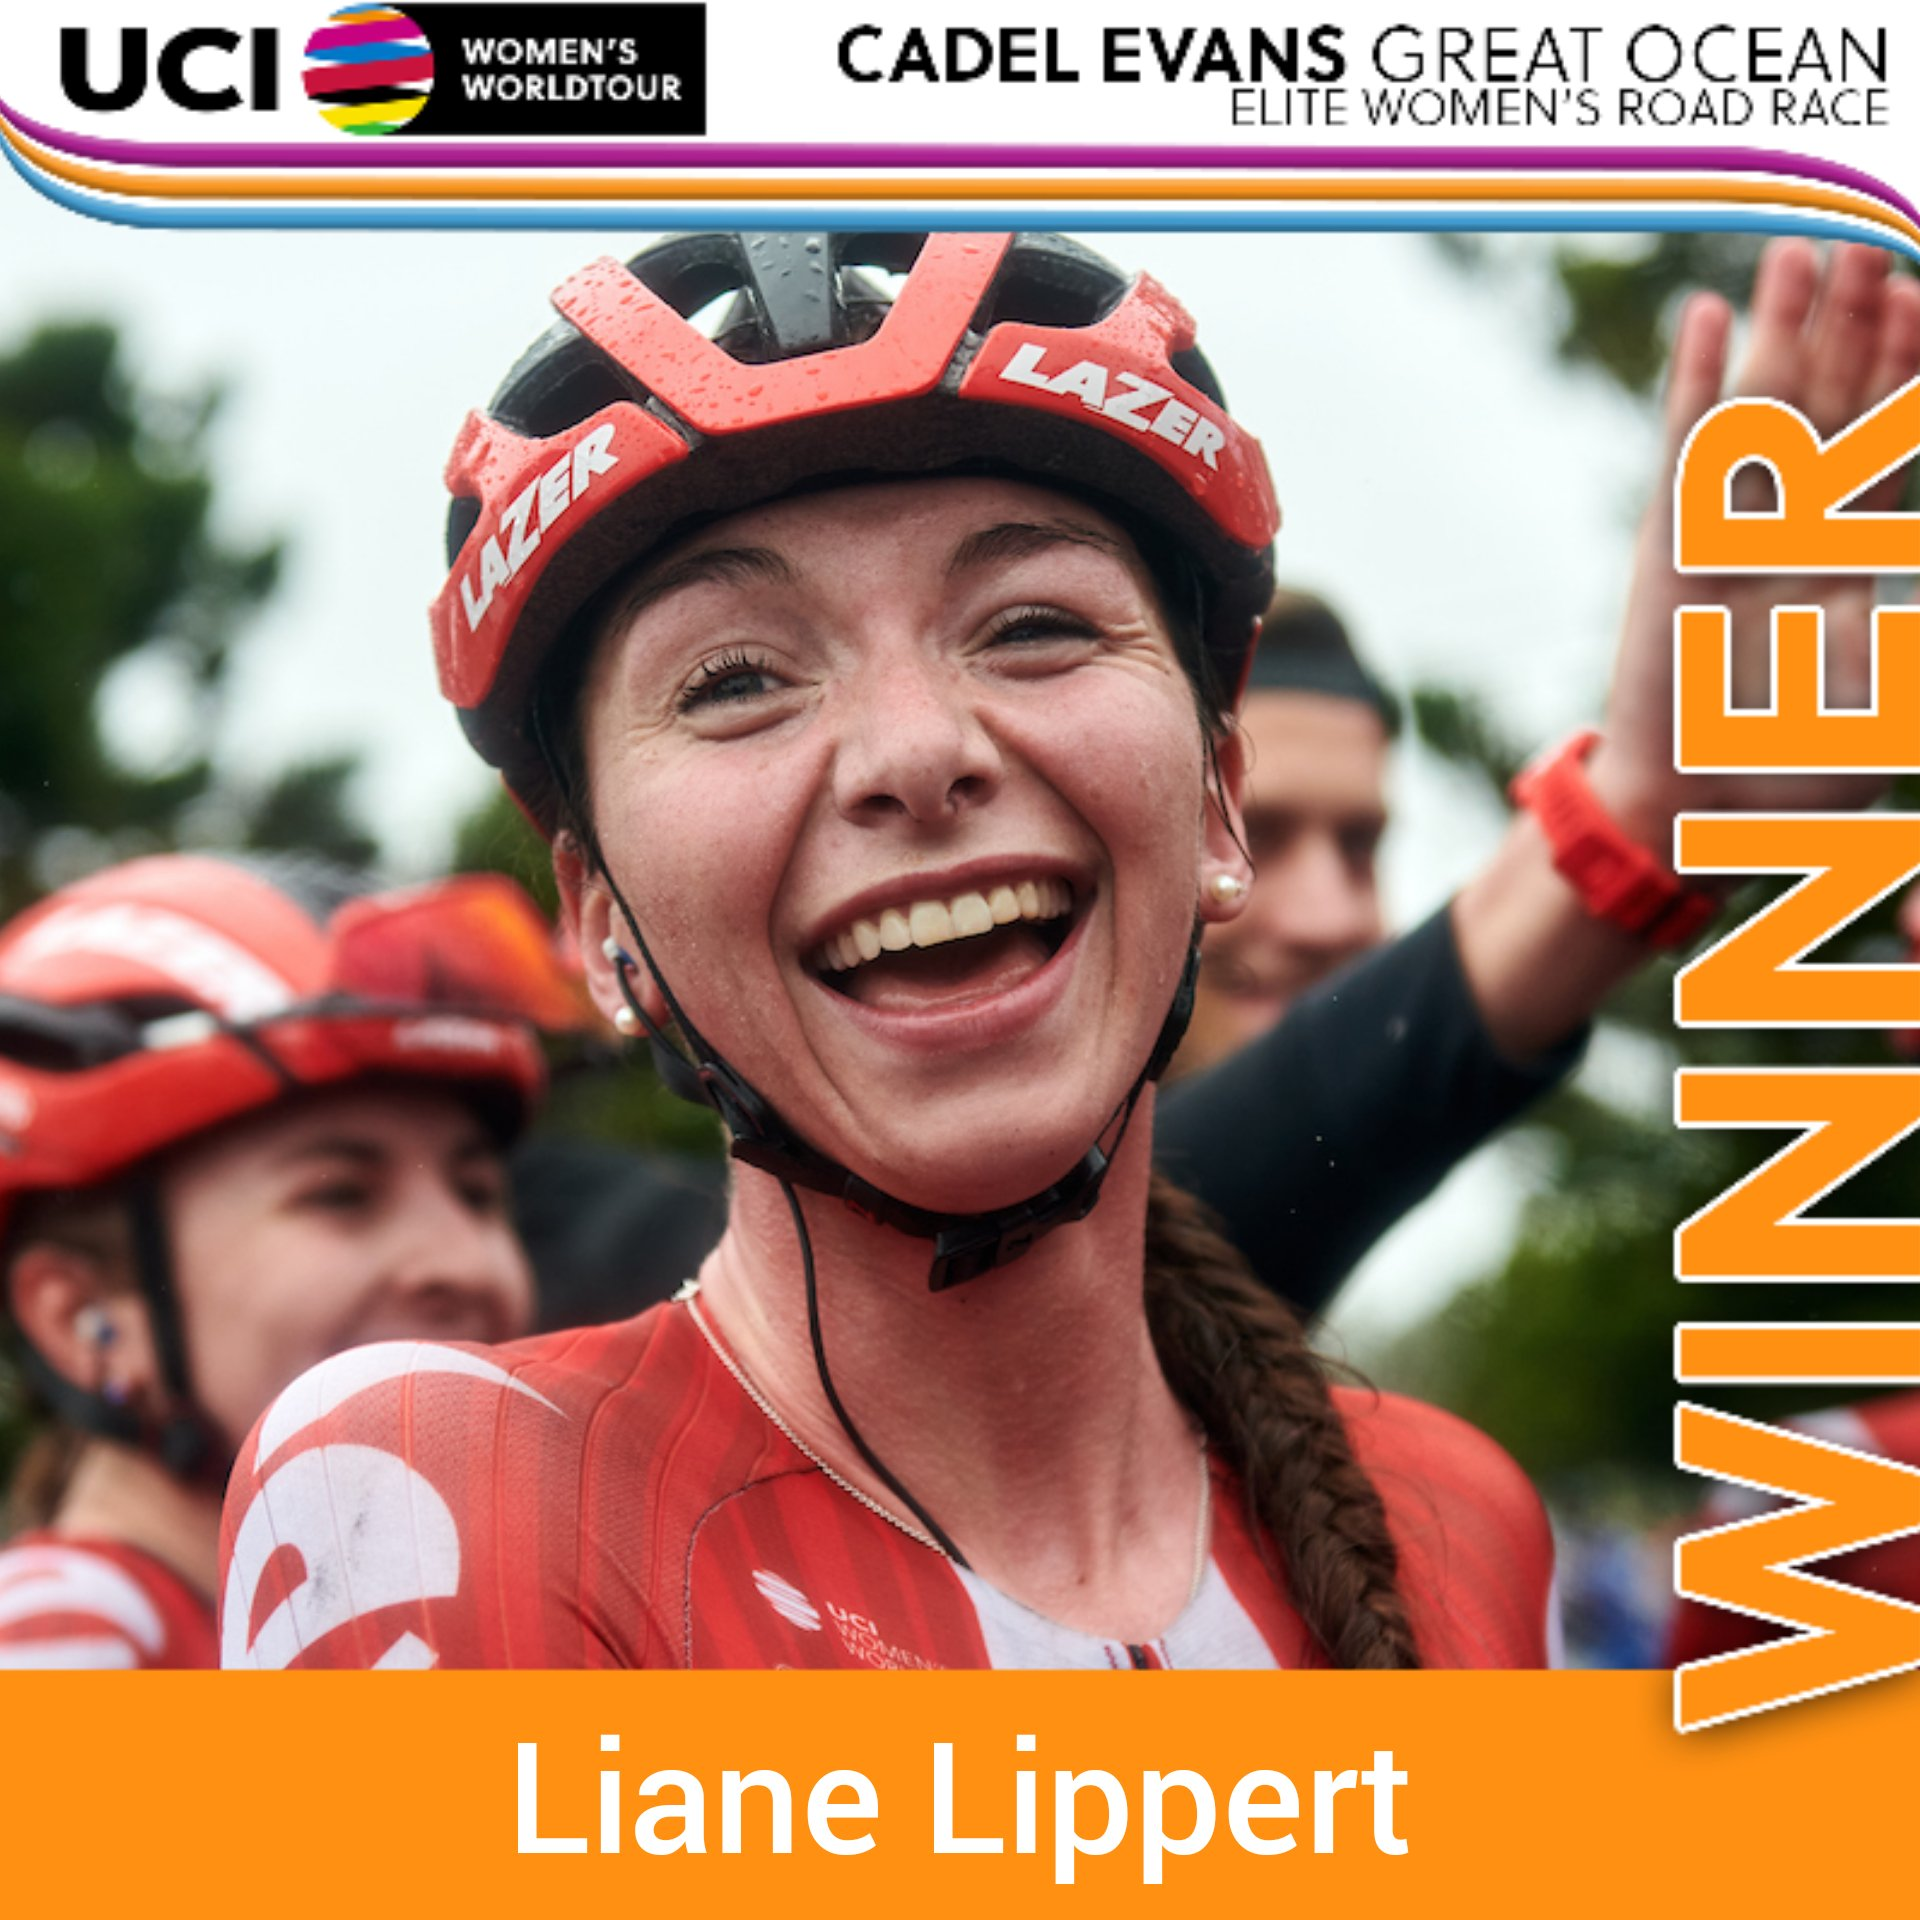 Germany’s Liane Lippert earned a solo victory at the Cadel Evans Great Ocean Road Race ©UCI